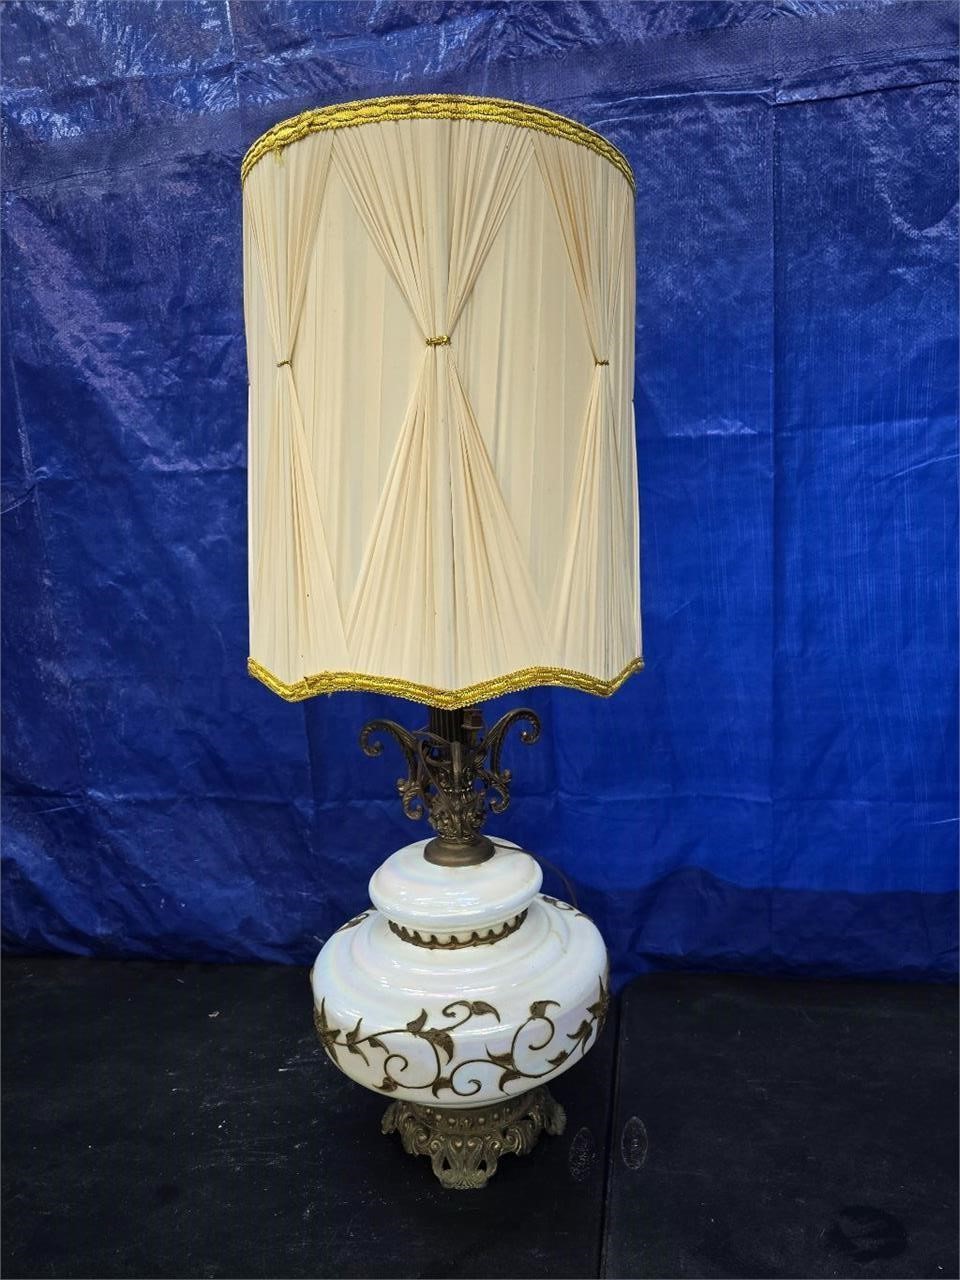 Timeless Treasures and More Online Auction